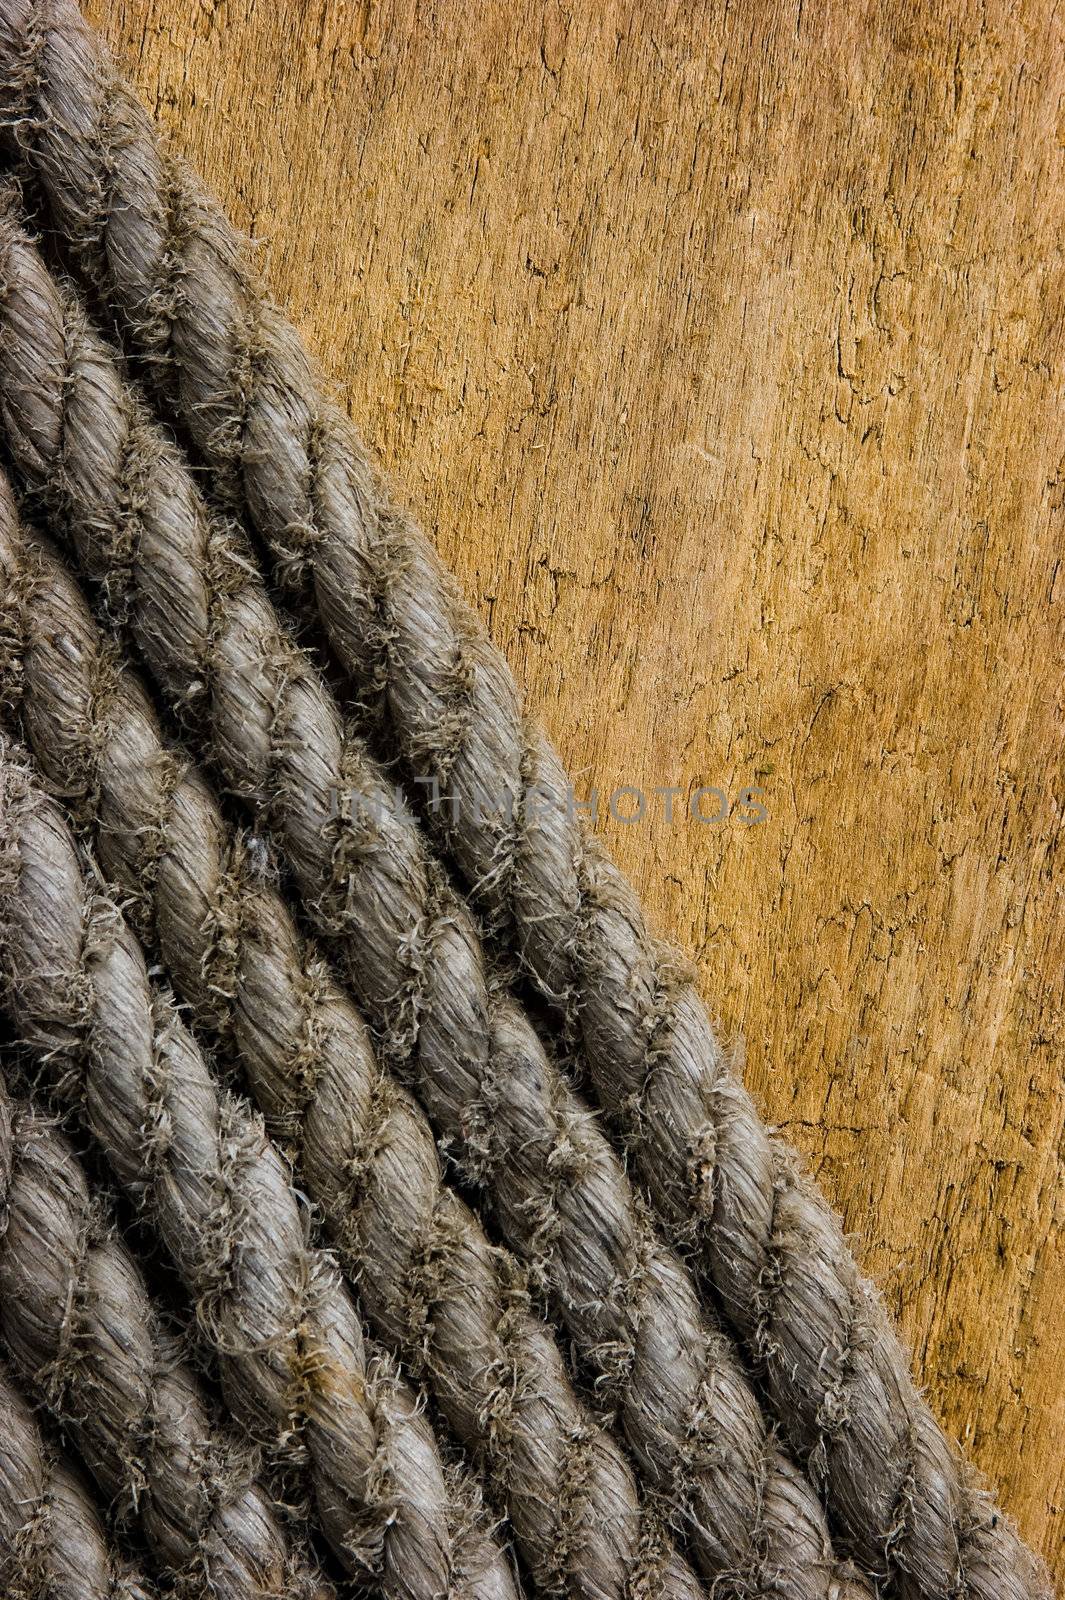 texture of the ropes against the board